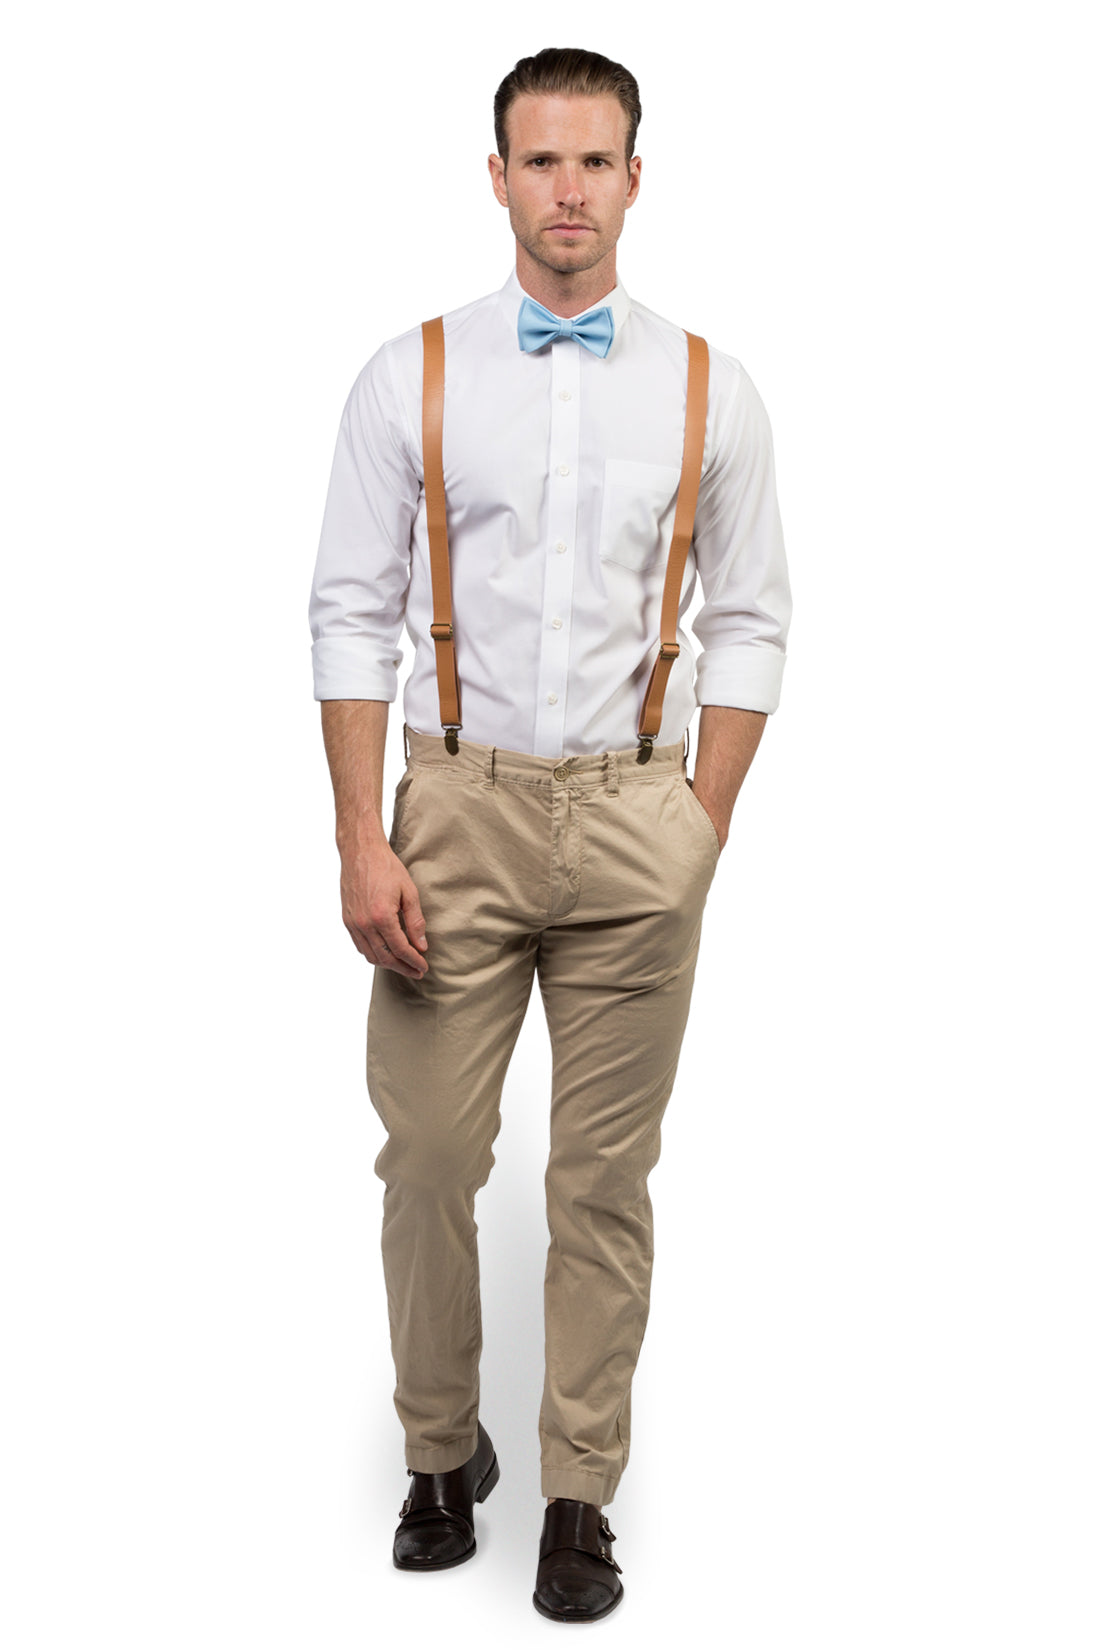 Tan Leather Suspenders & Baby Blue Bow Tie